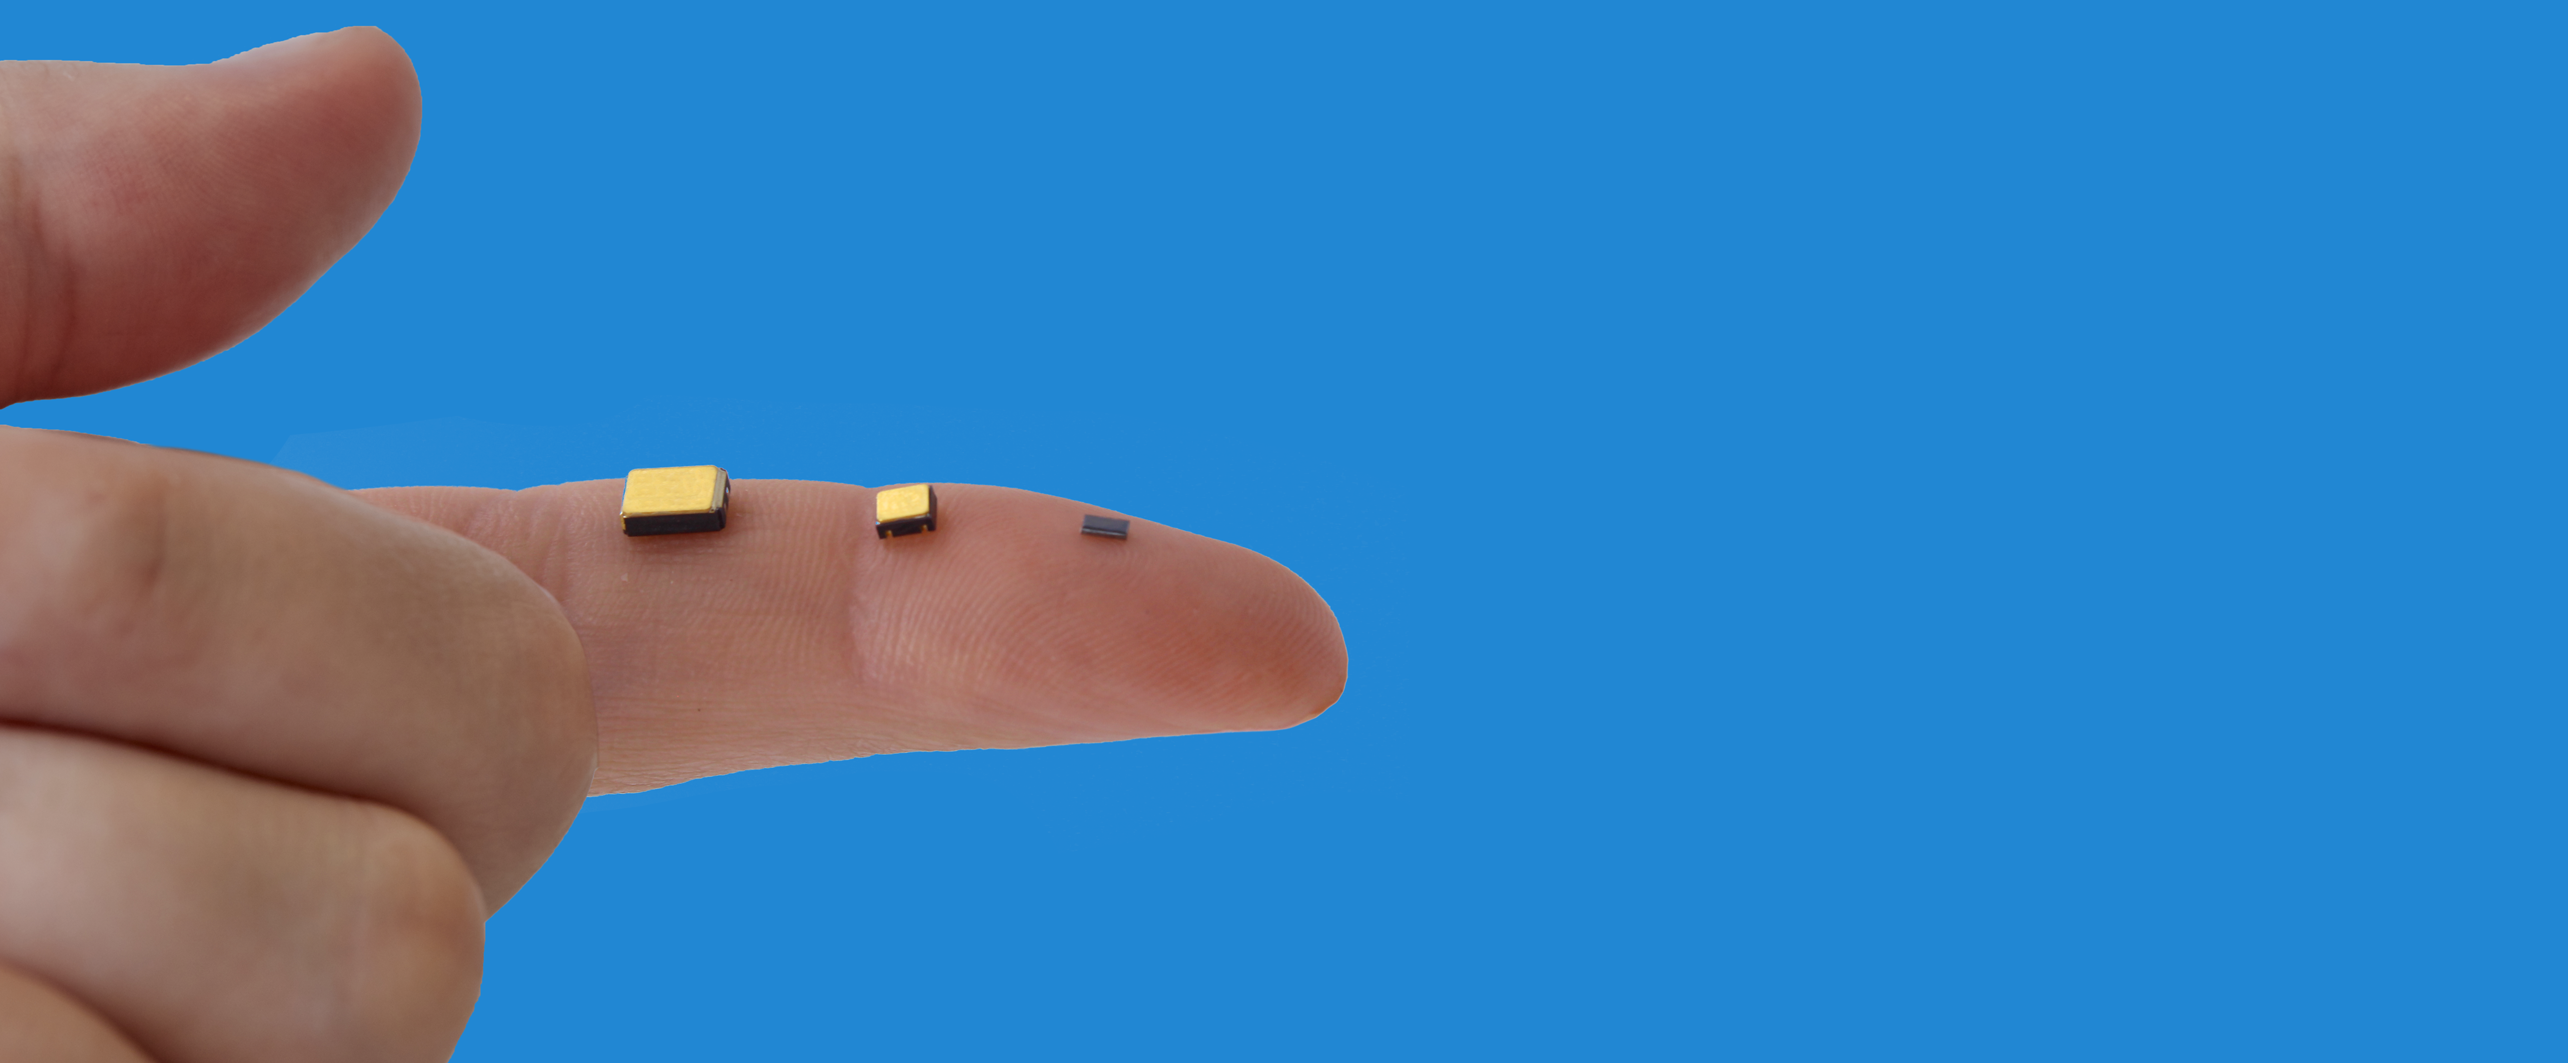 Finger with various High-Resolution IVA Testing components against a blue background for ORS website